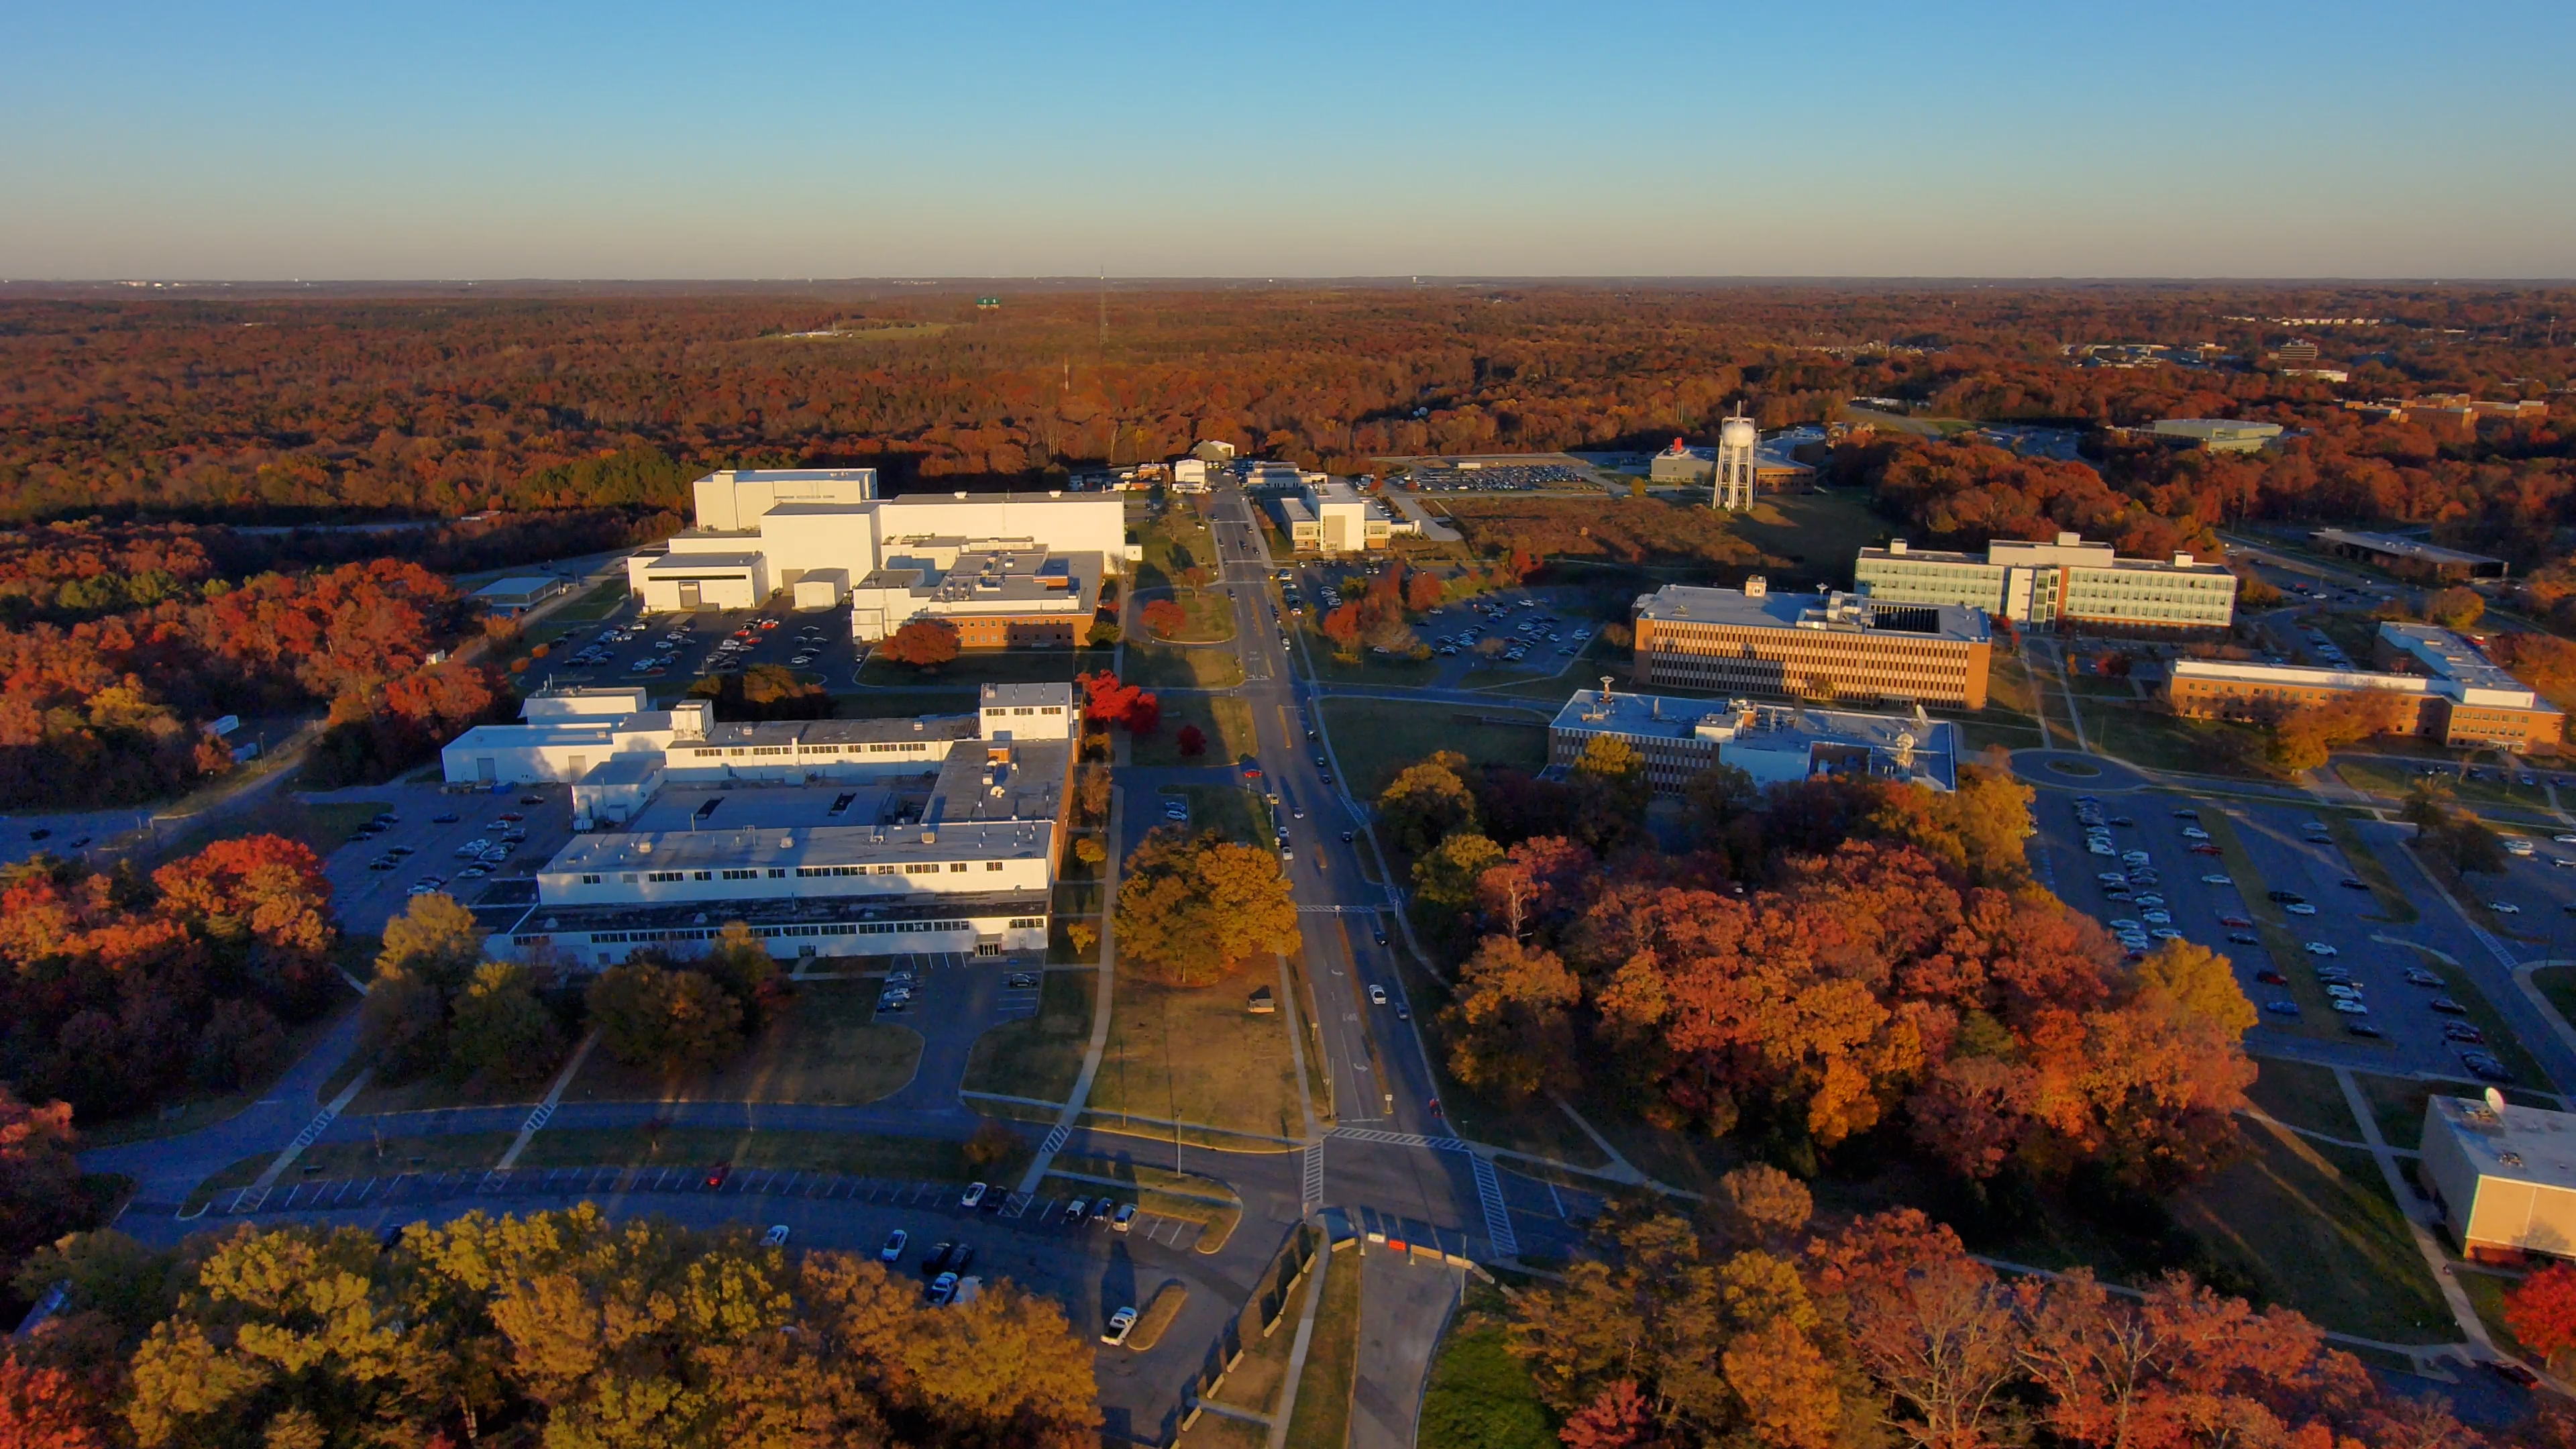 Views of the Goddard campus, from various heights, looking northeast from above Building 21, with fall colors in the late afternoon and magic hour. Several shots rise from below the tree line. Others fly forward or backward, looking toward the Integration & Testing Facility prominent in the background.Credit: NASA/Francis Reddy